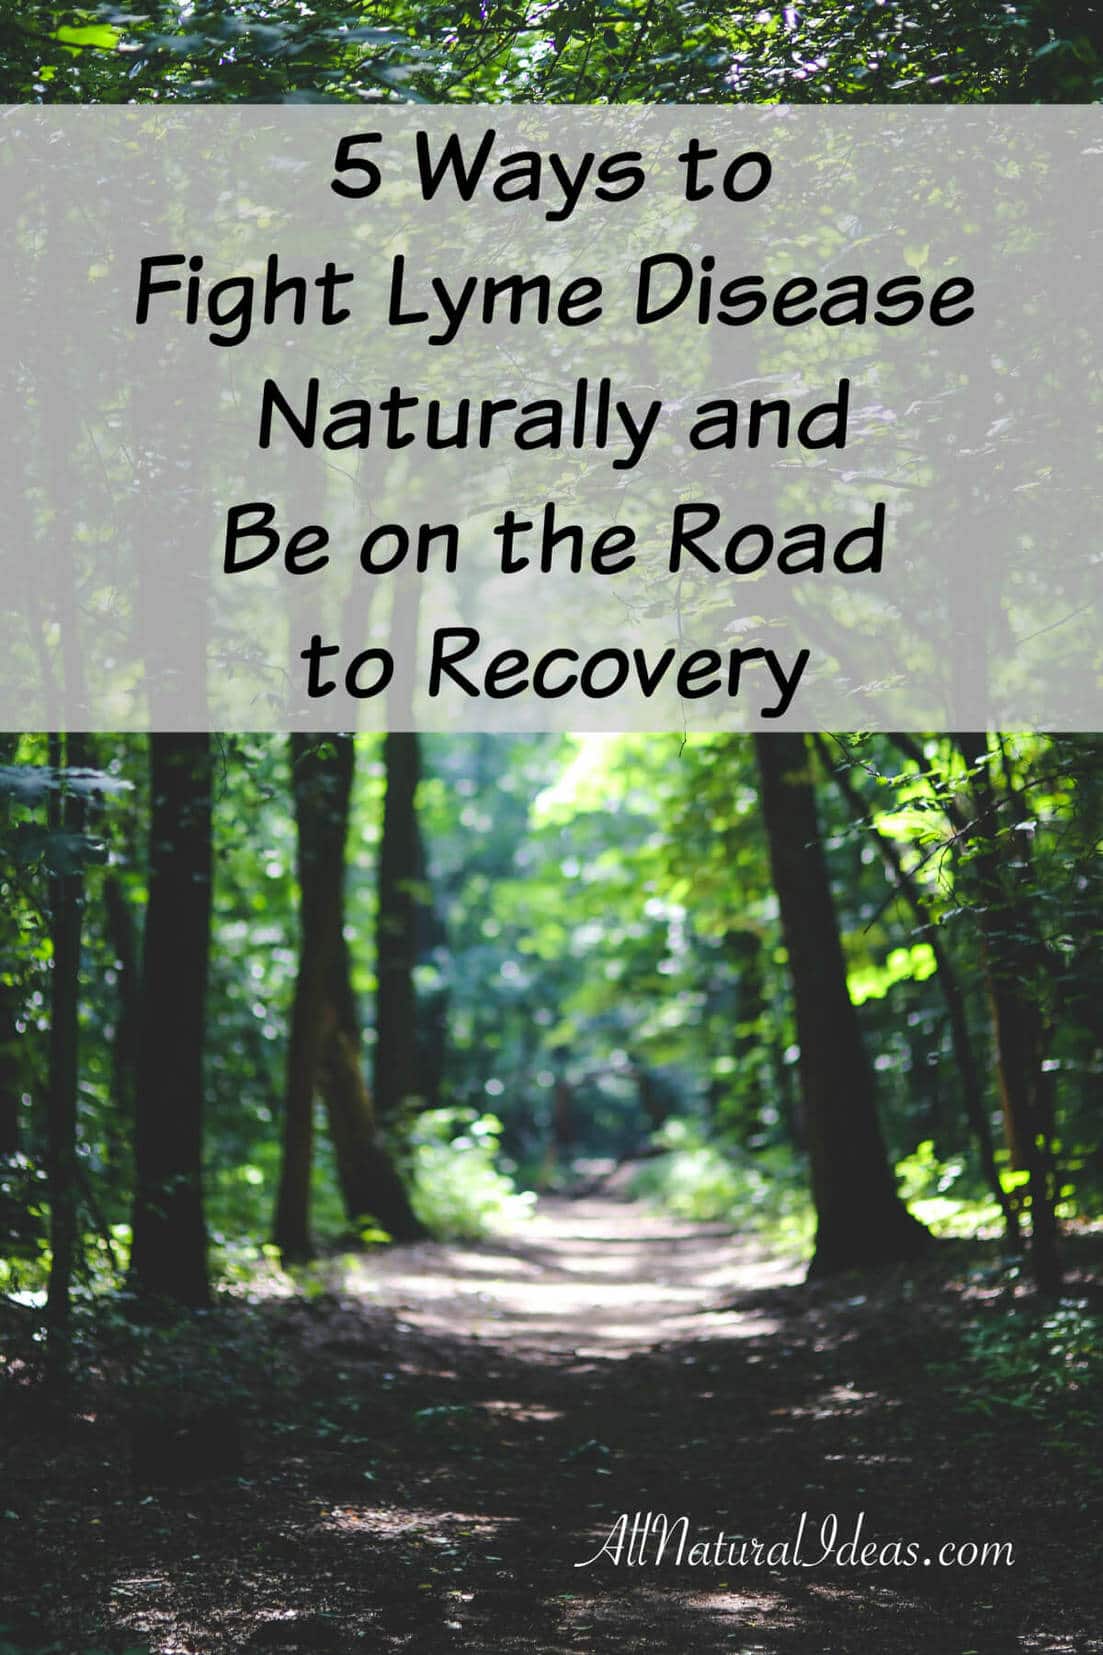 Are you looking to fight Lyme disease naturally? I had to fight Lyme too many times and I looked to natural remedies for a full recovery.